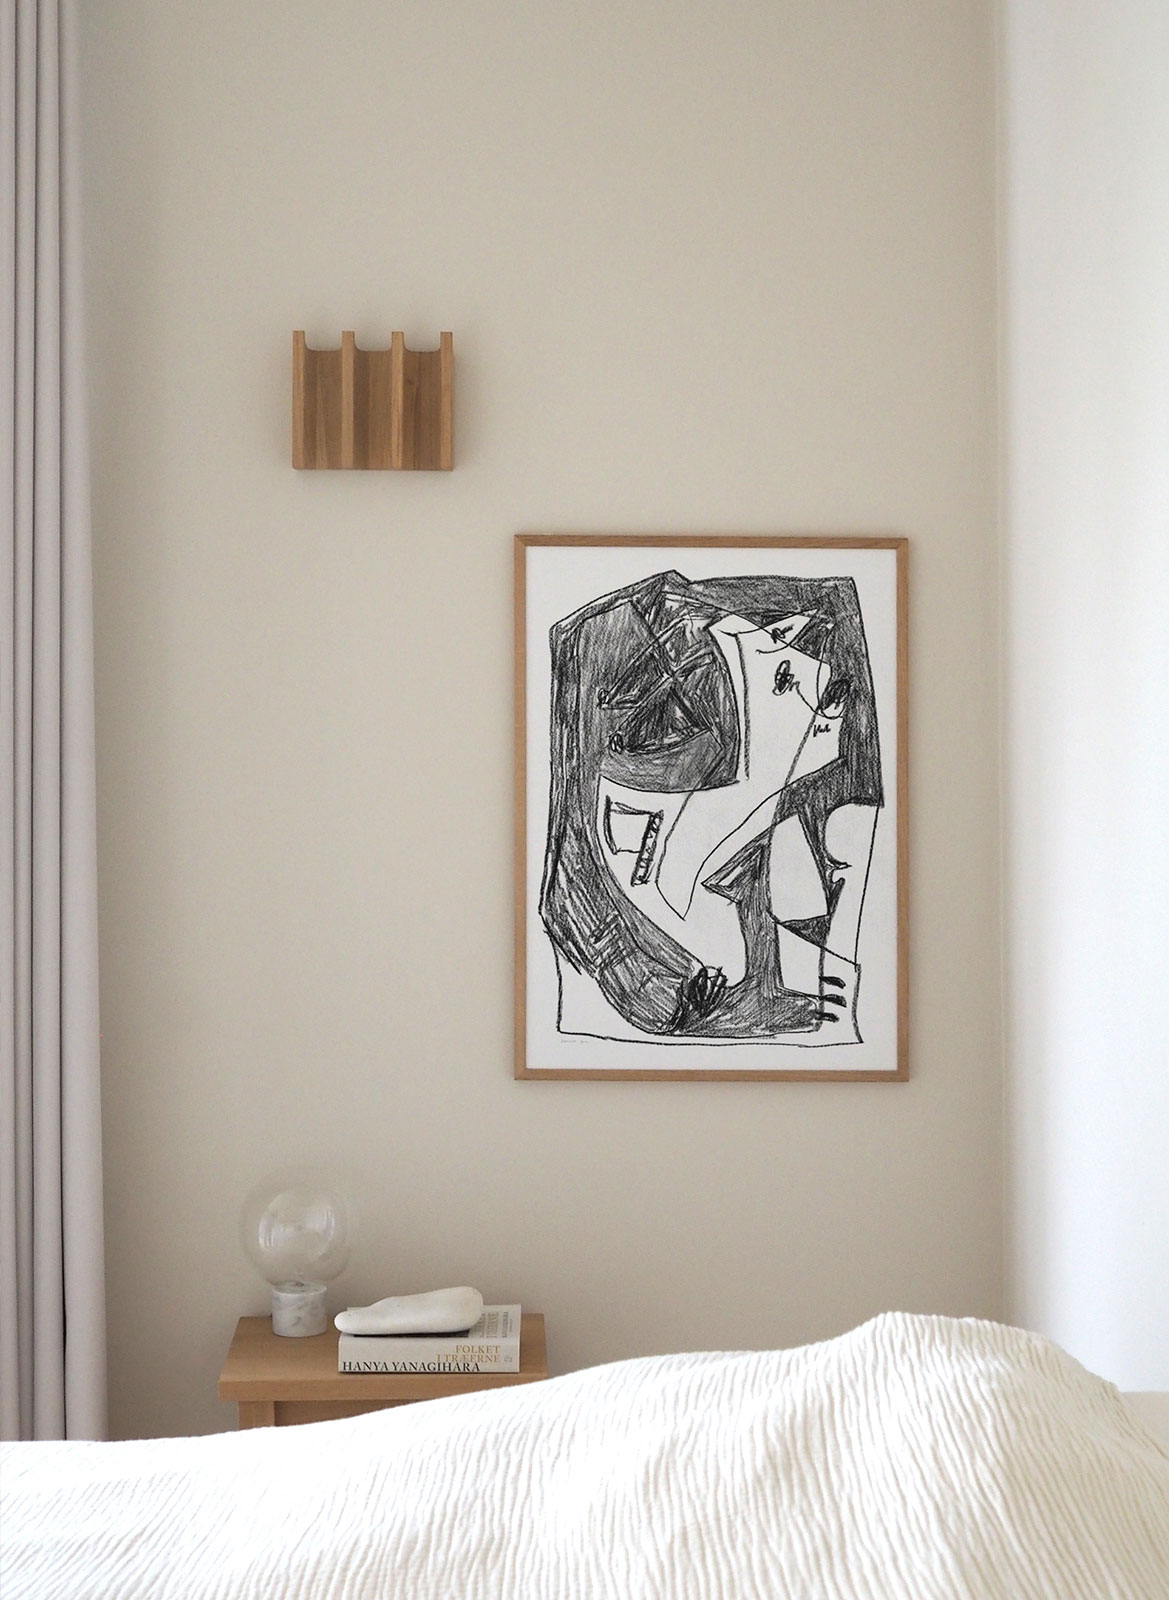 Framed minimalistic poster hanging above bed by Atelier Cph